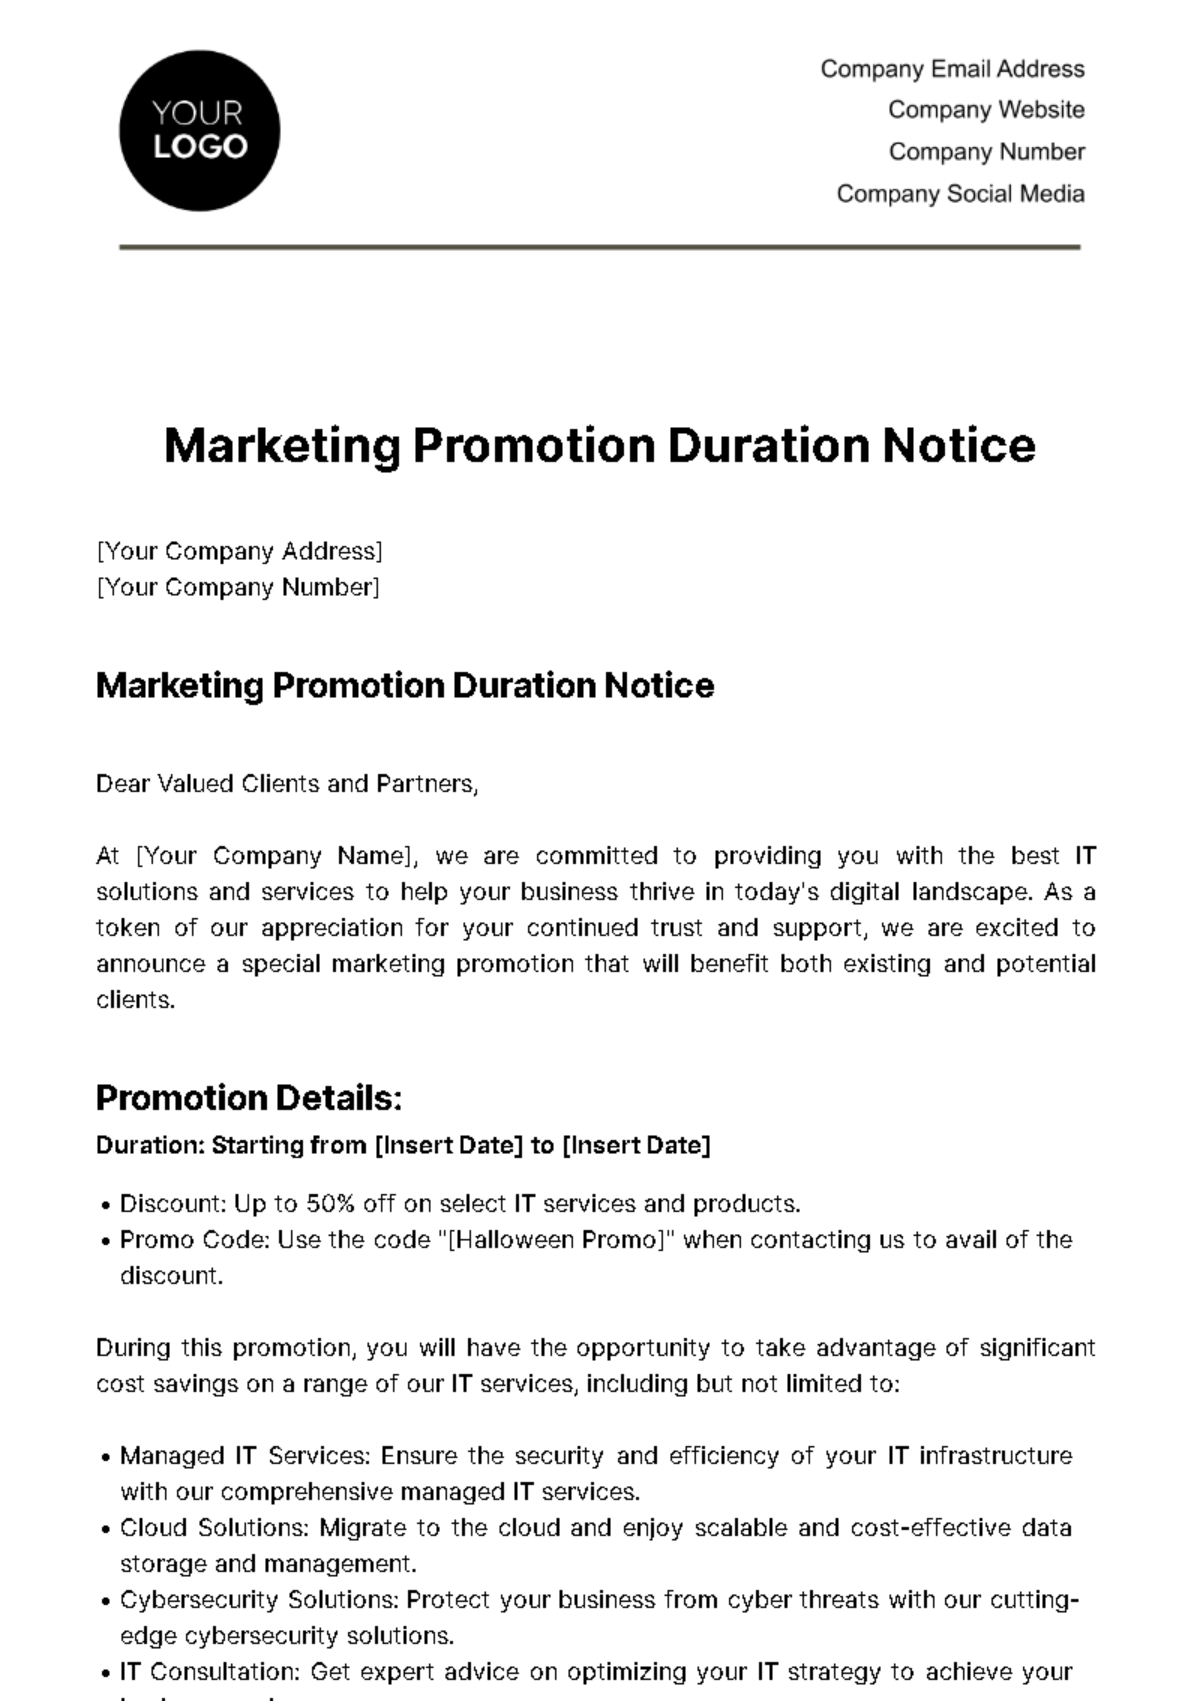 Marketing Promotion Duration Notice Template